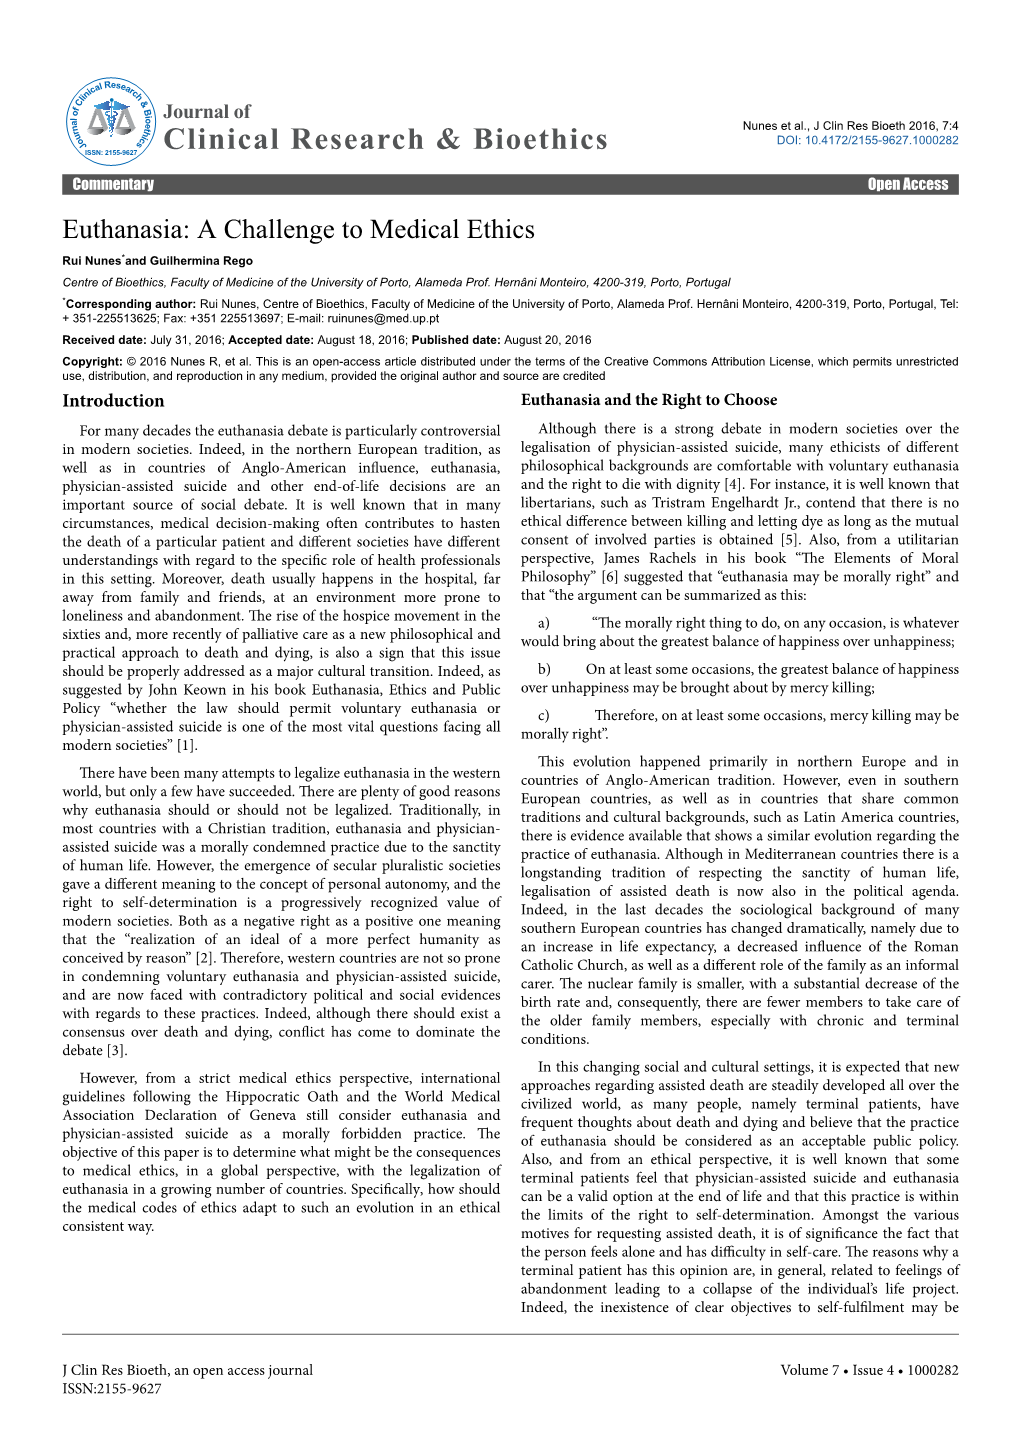 Euthanasia: a Challenge to Medical Ethics Rui Nunes*And Guilhermina Rego Centre of Bioethics, Faculty of Medicine of the University of Porto, Alameda Prof